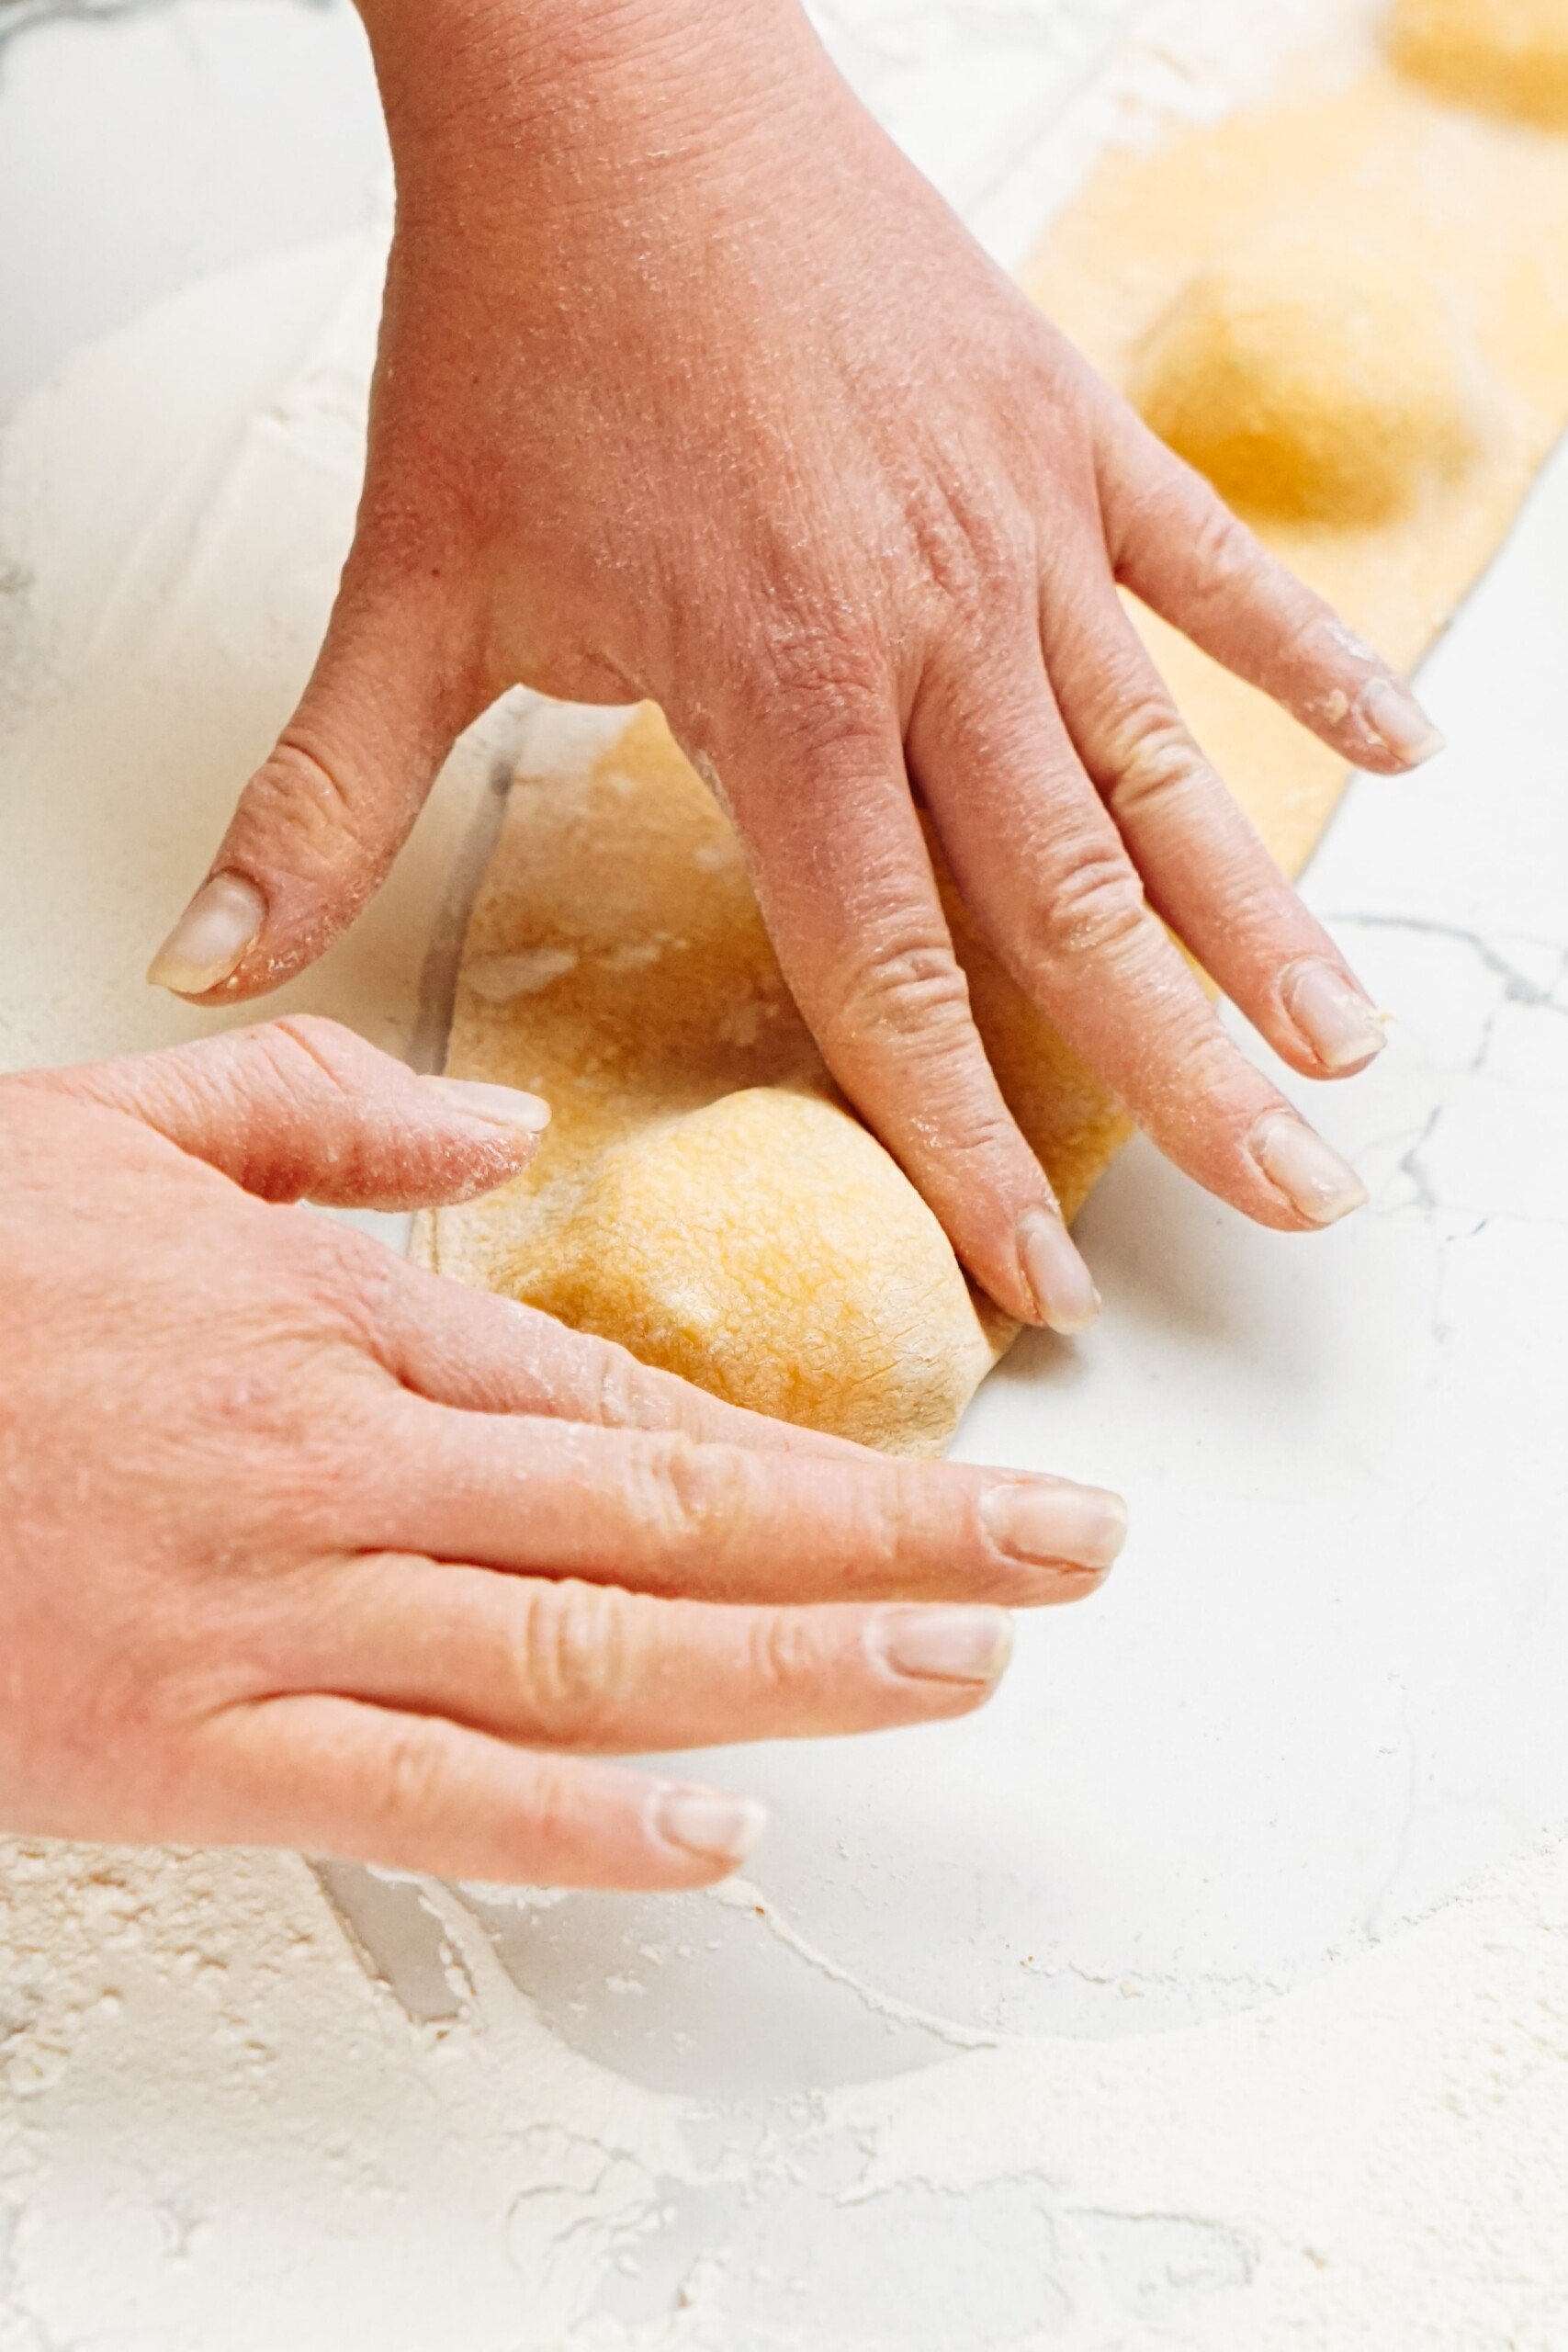 A woman's hands are pressing dough around ravioli filling